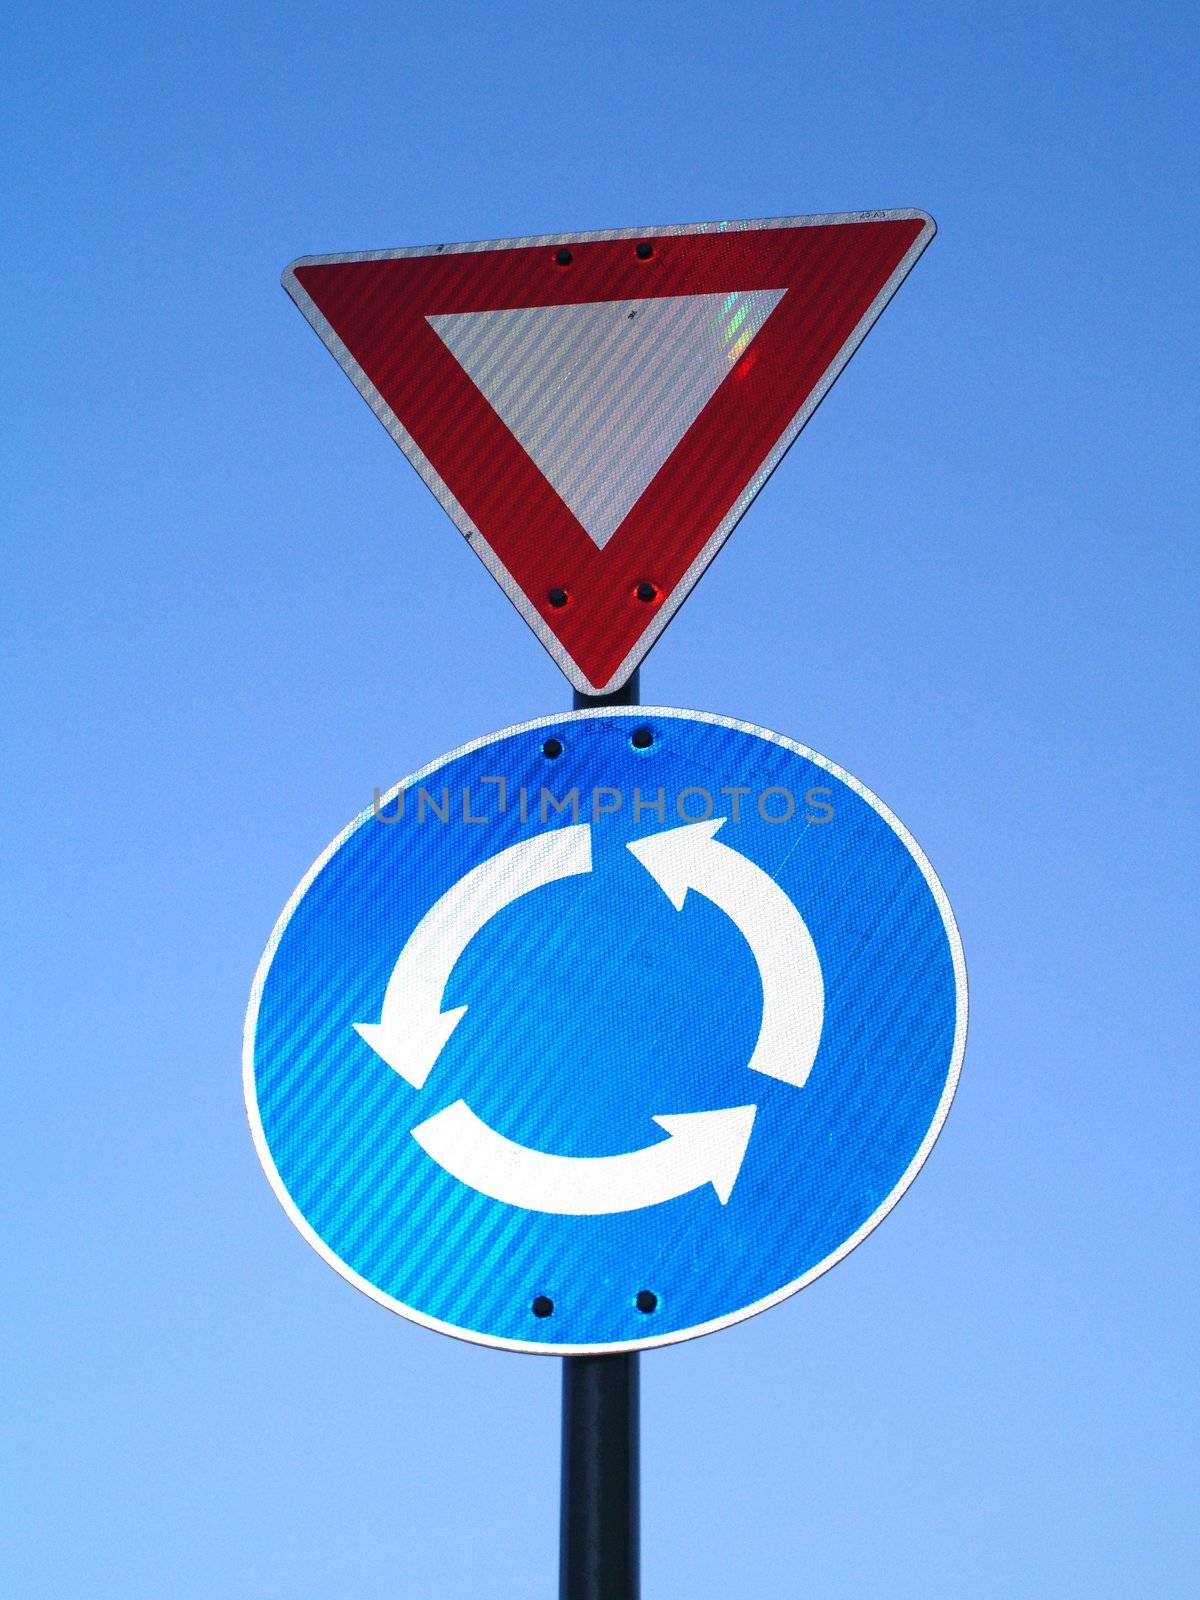 round-about sign